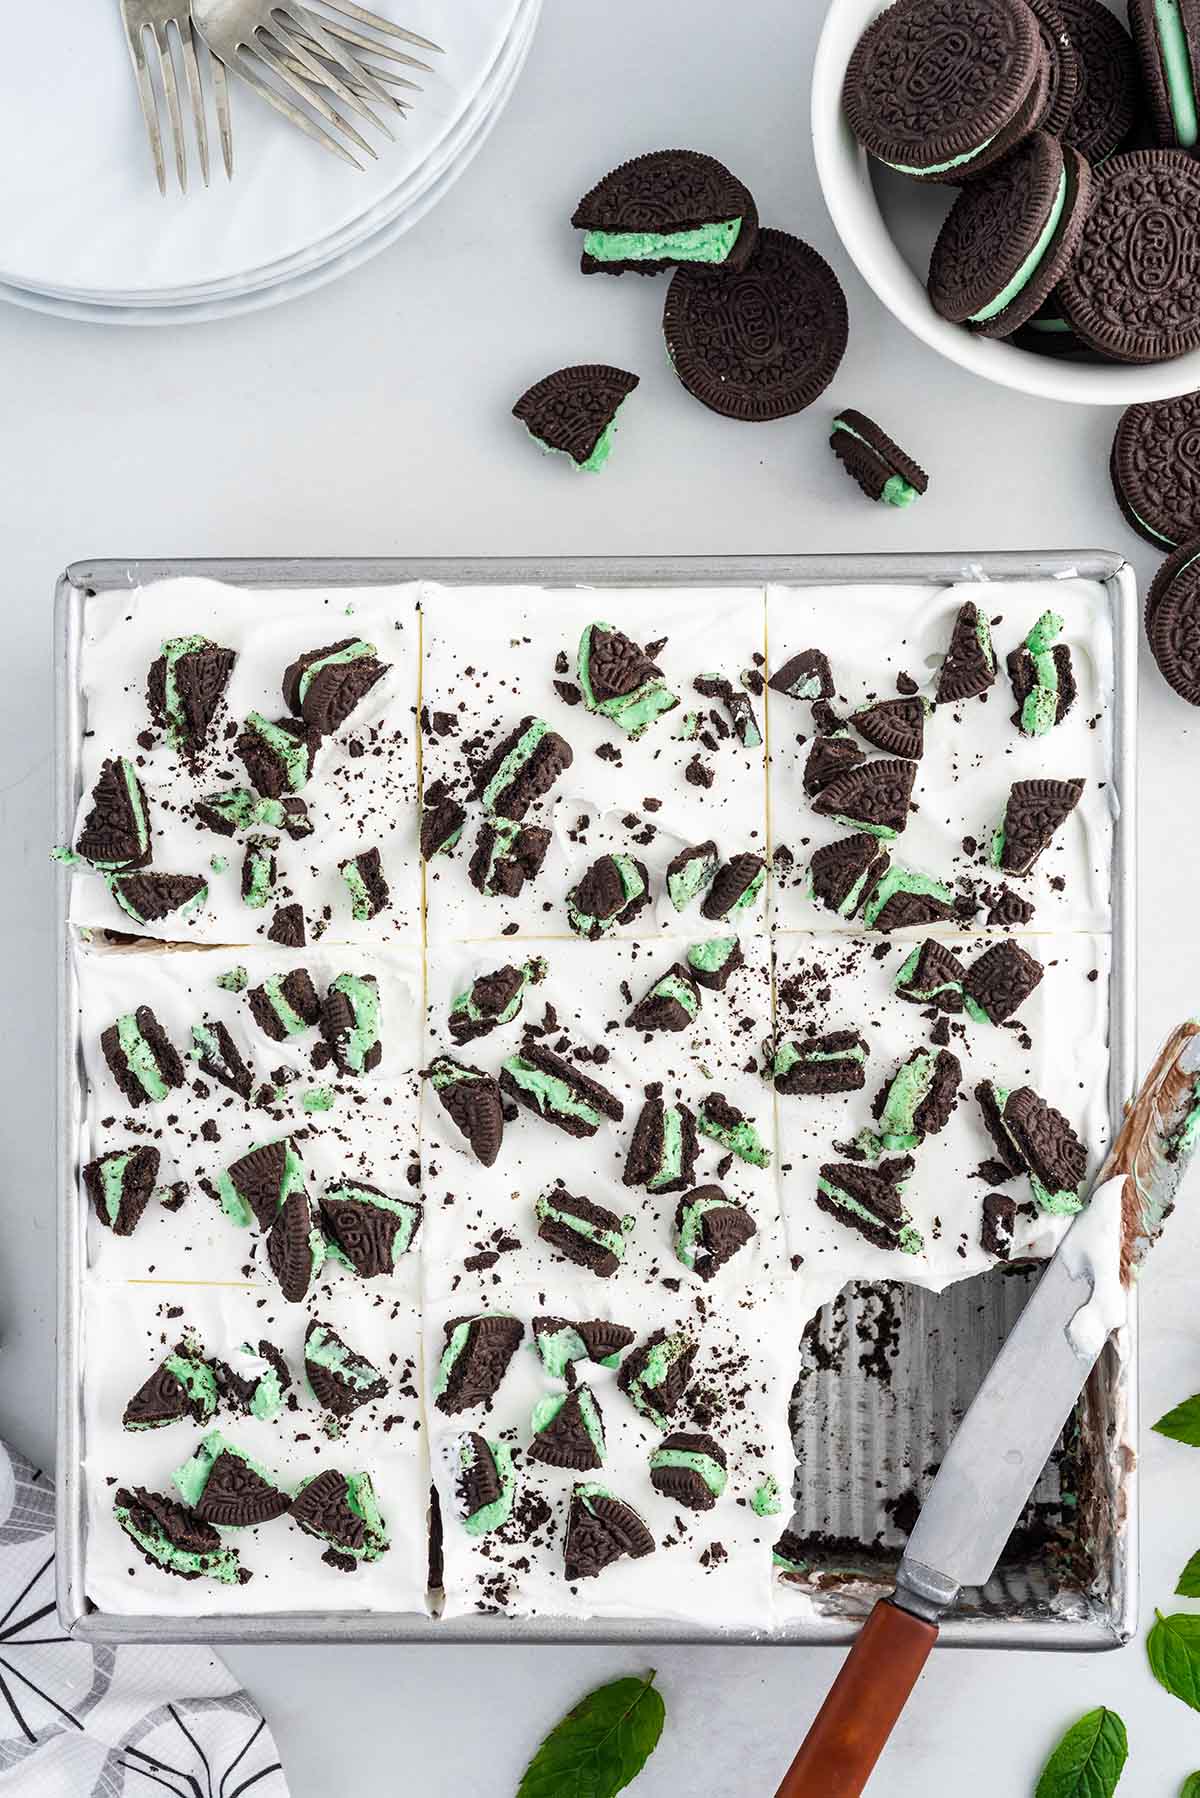 top view of mint oreo dessert with oreo crumbs on top